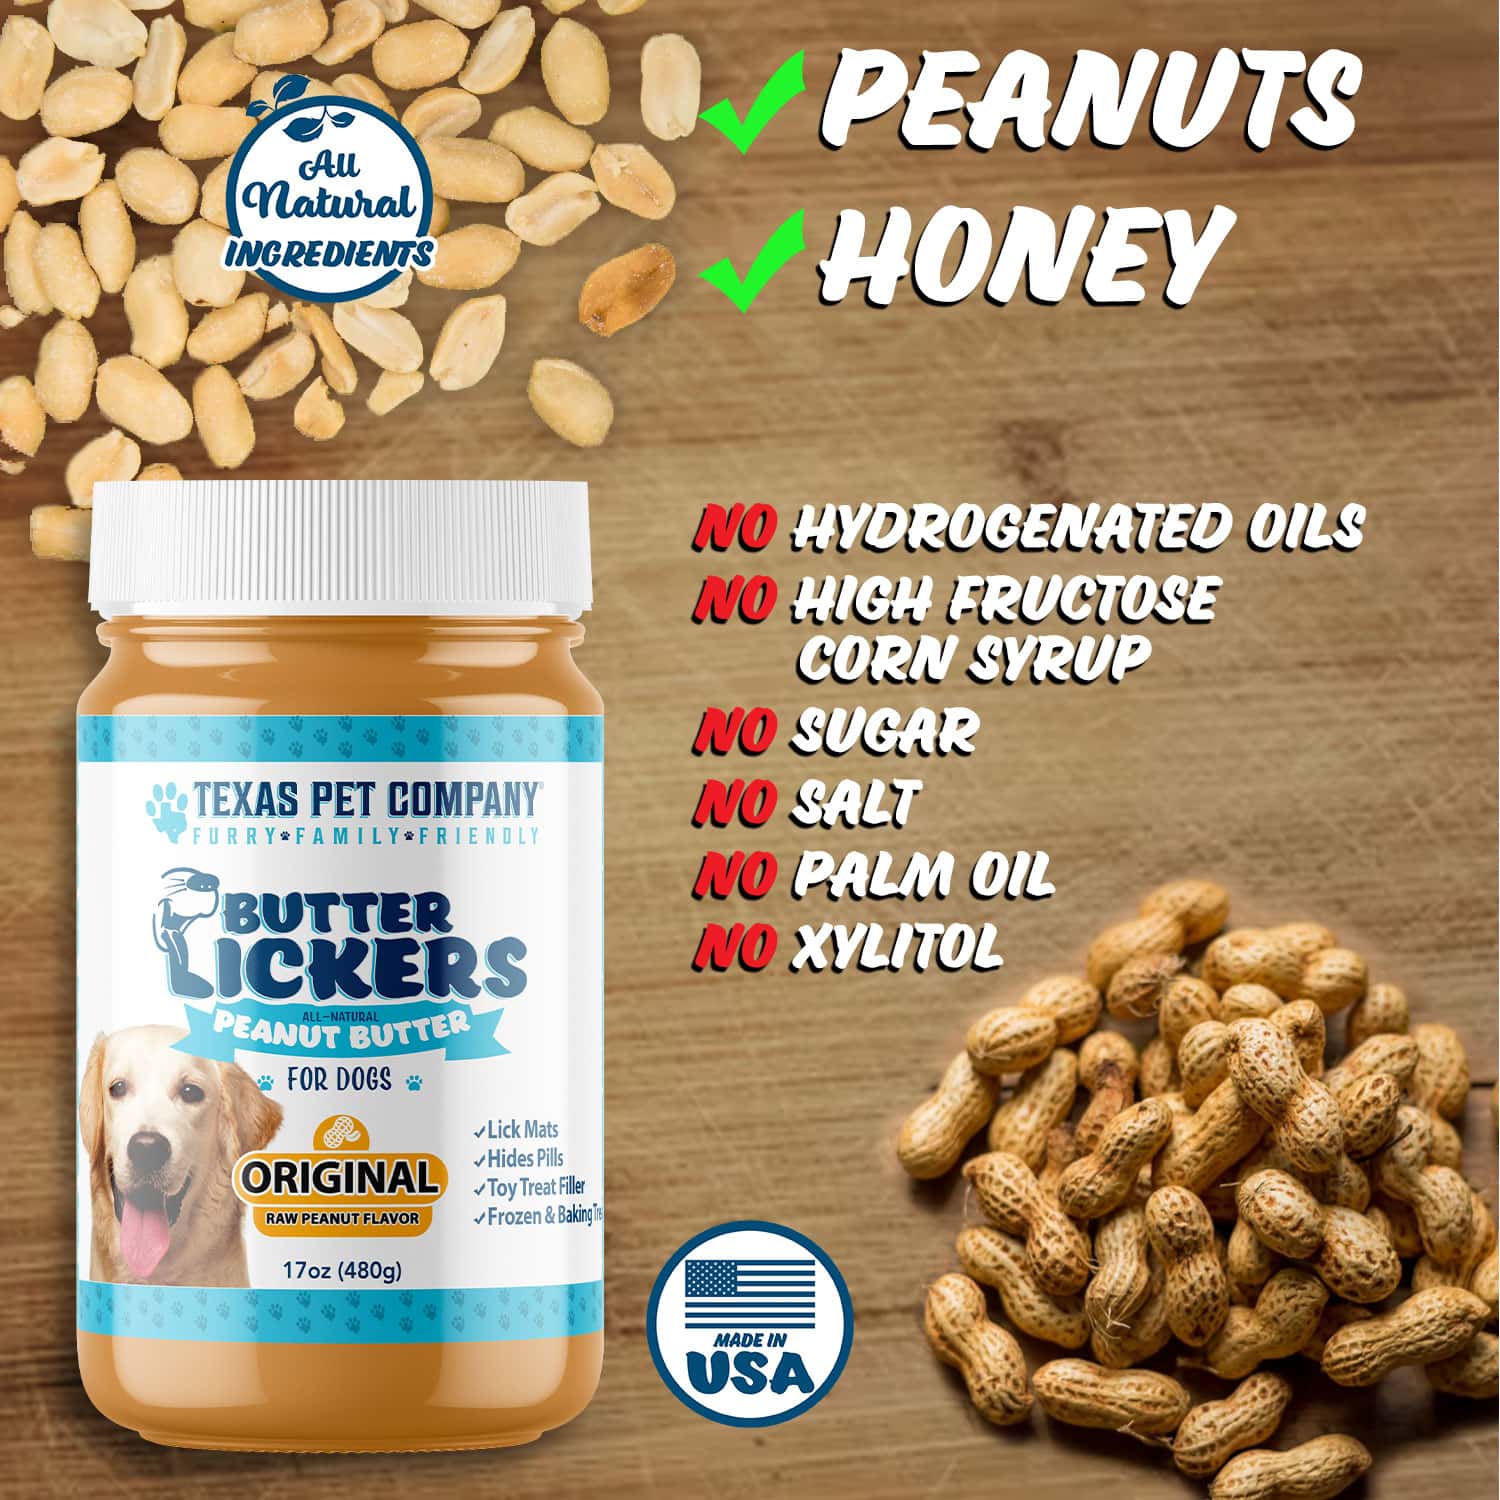 https://texaspetcompany.com/wp-content/uploads/2022/05/Butter-Lickers-Original-Dog-Peanut-Butter-For-Dogs-Ingredients.jpg